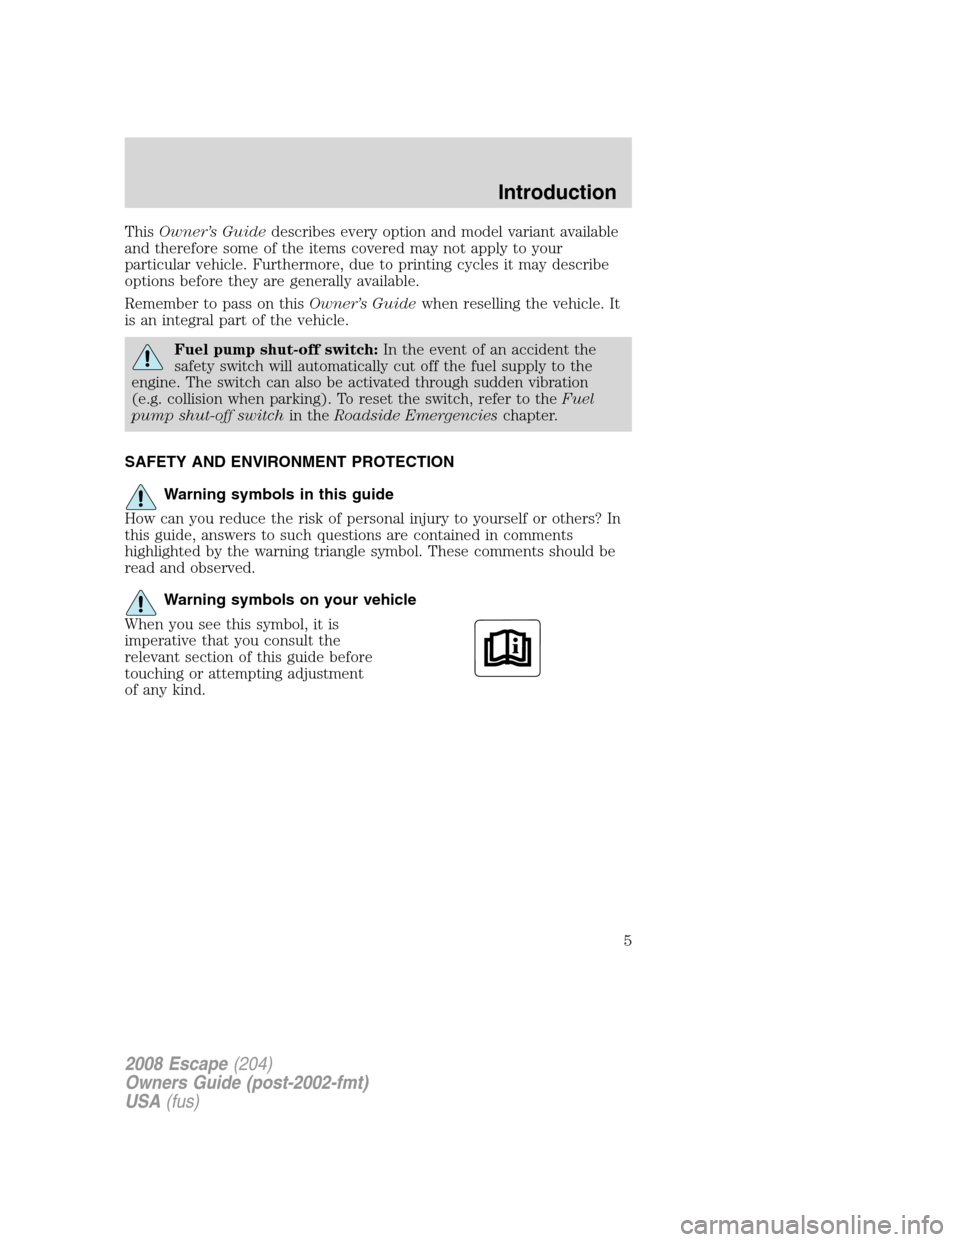 FORD ESCAPE 2008 2.G Owners Manual ThisOwner’s Guidedescribes every option and model variant available
and therefore some of the items covered may not apply to your
particular vehicle. Furthermore, due to printing cycles it may descr